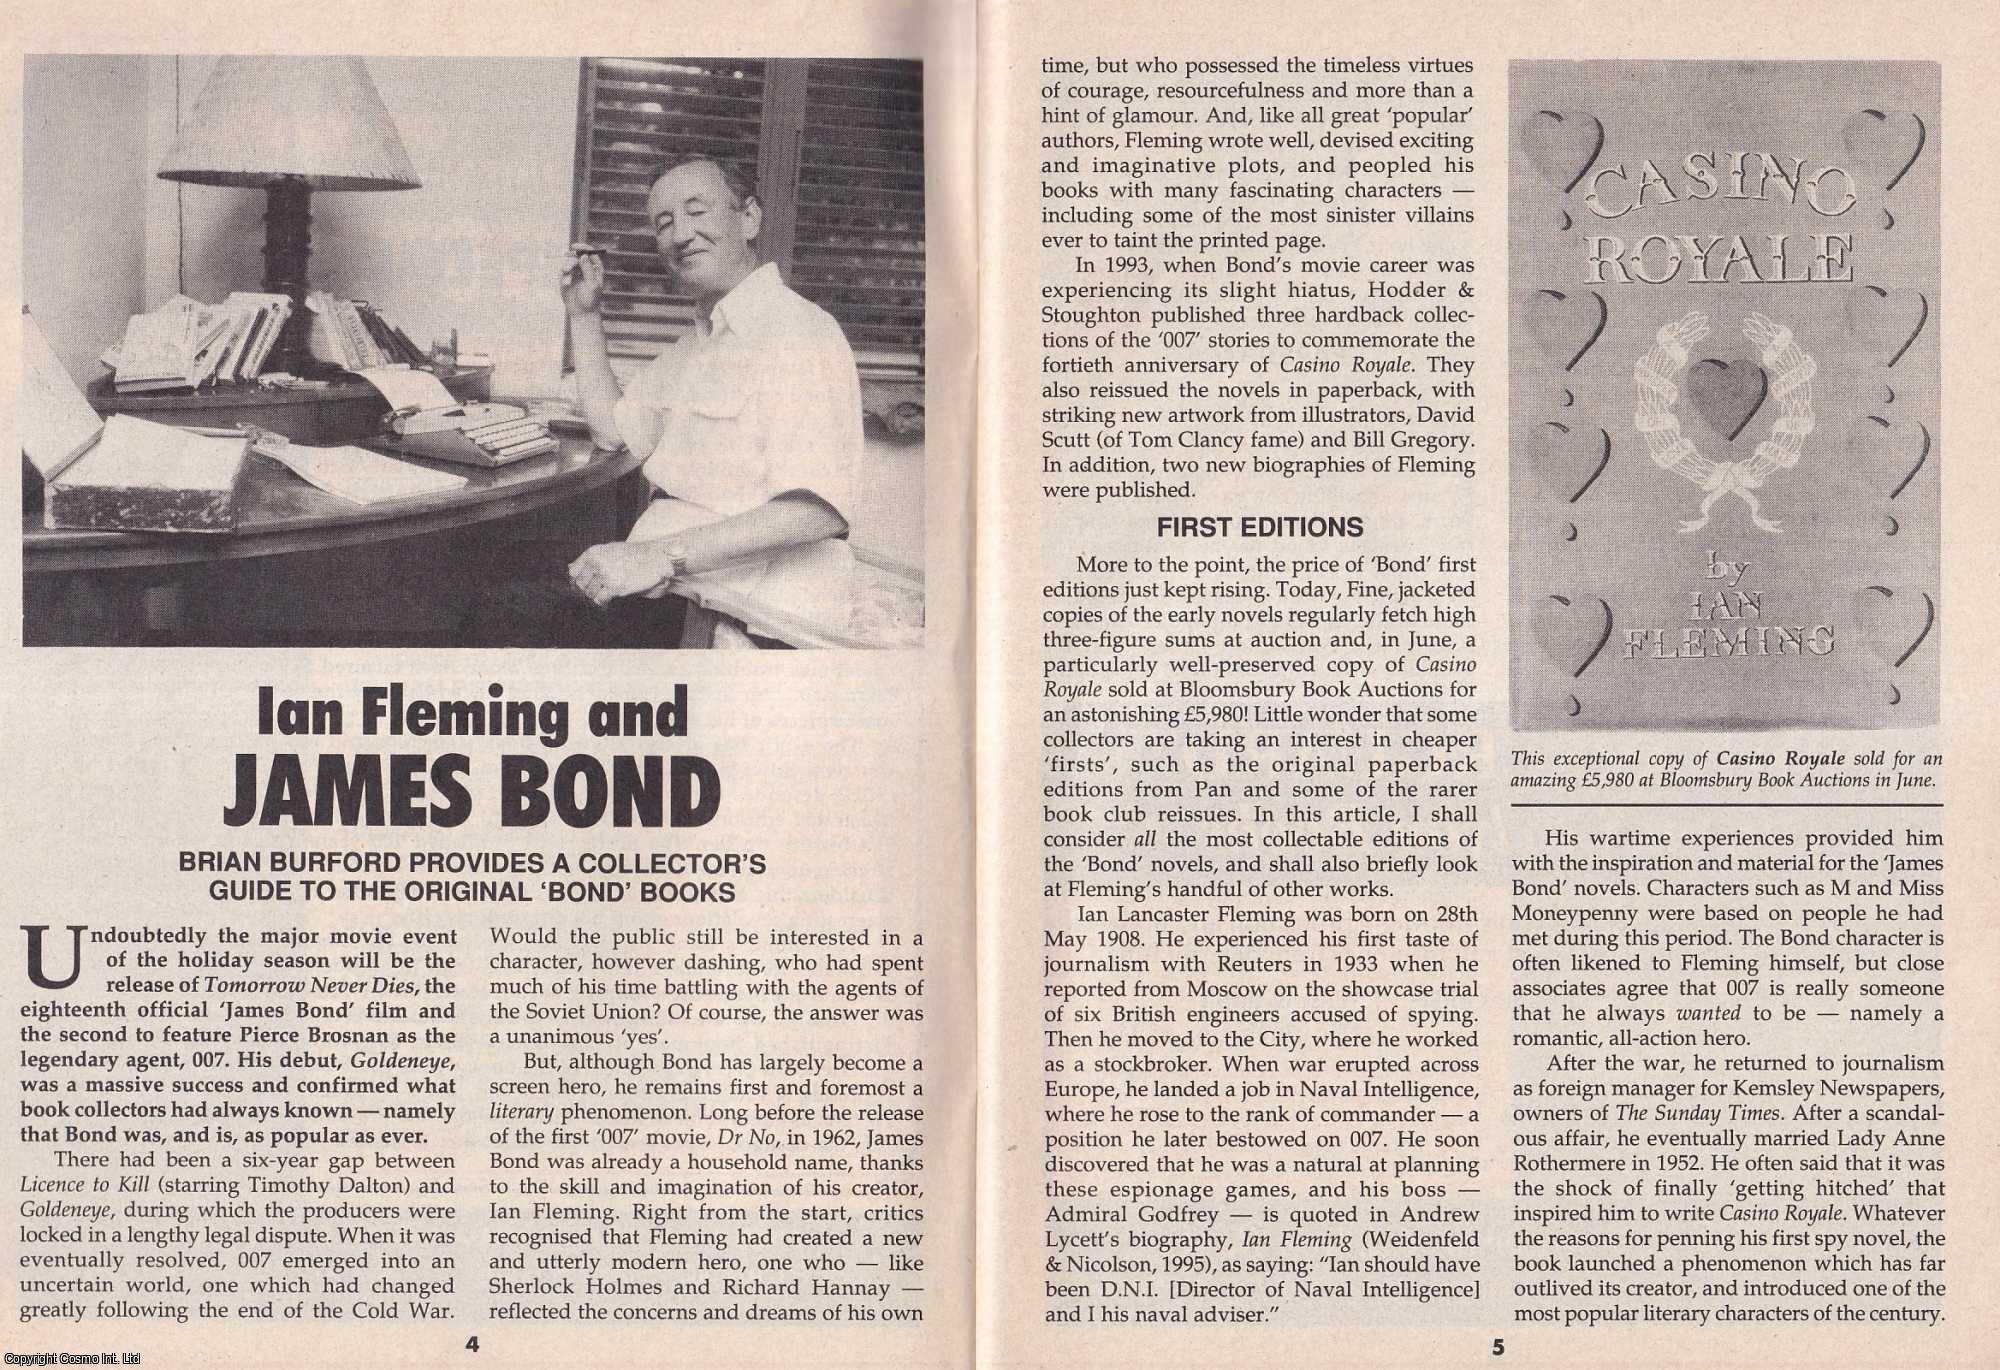 Brian Burford - Ian Fleming and James Bond. A Collector's Guide to The Original Bond Books. This is an original article separated from an issue of The Book & Magazine Collector publication.